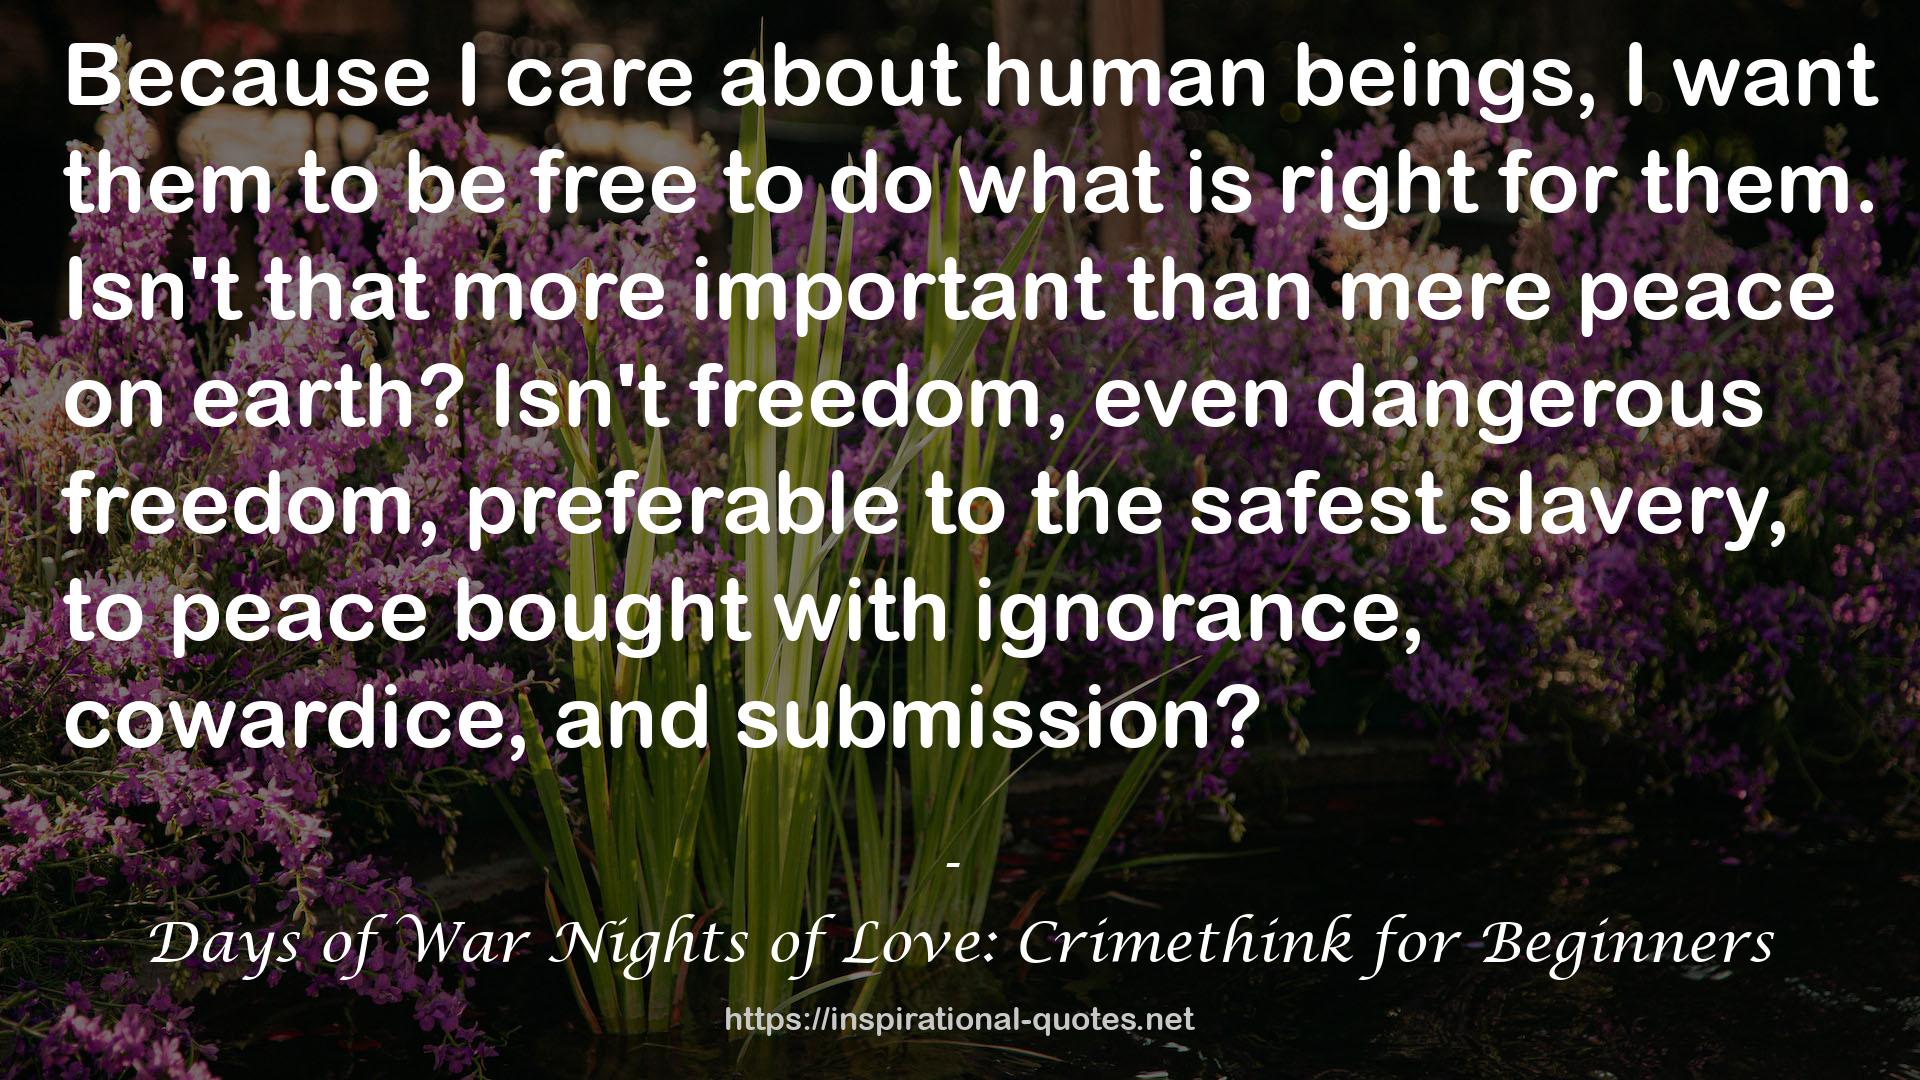 Days of War Nights of Love: Crimethink for Beginners QUOTES